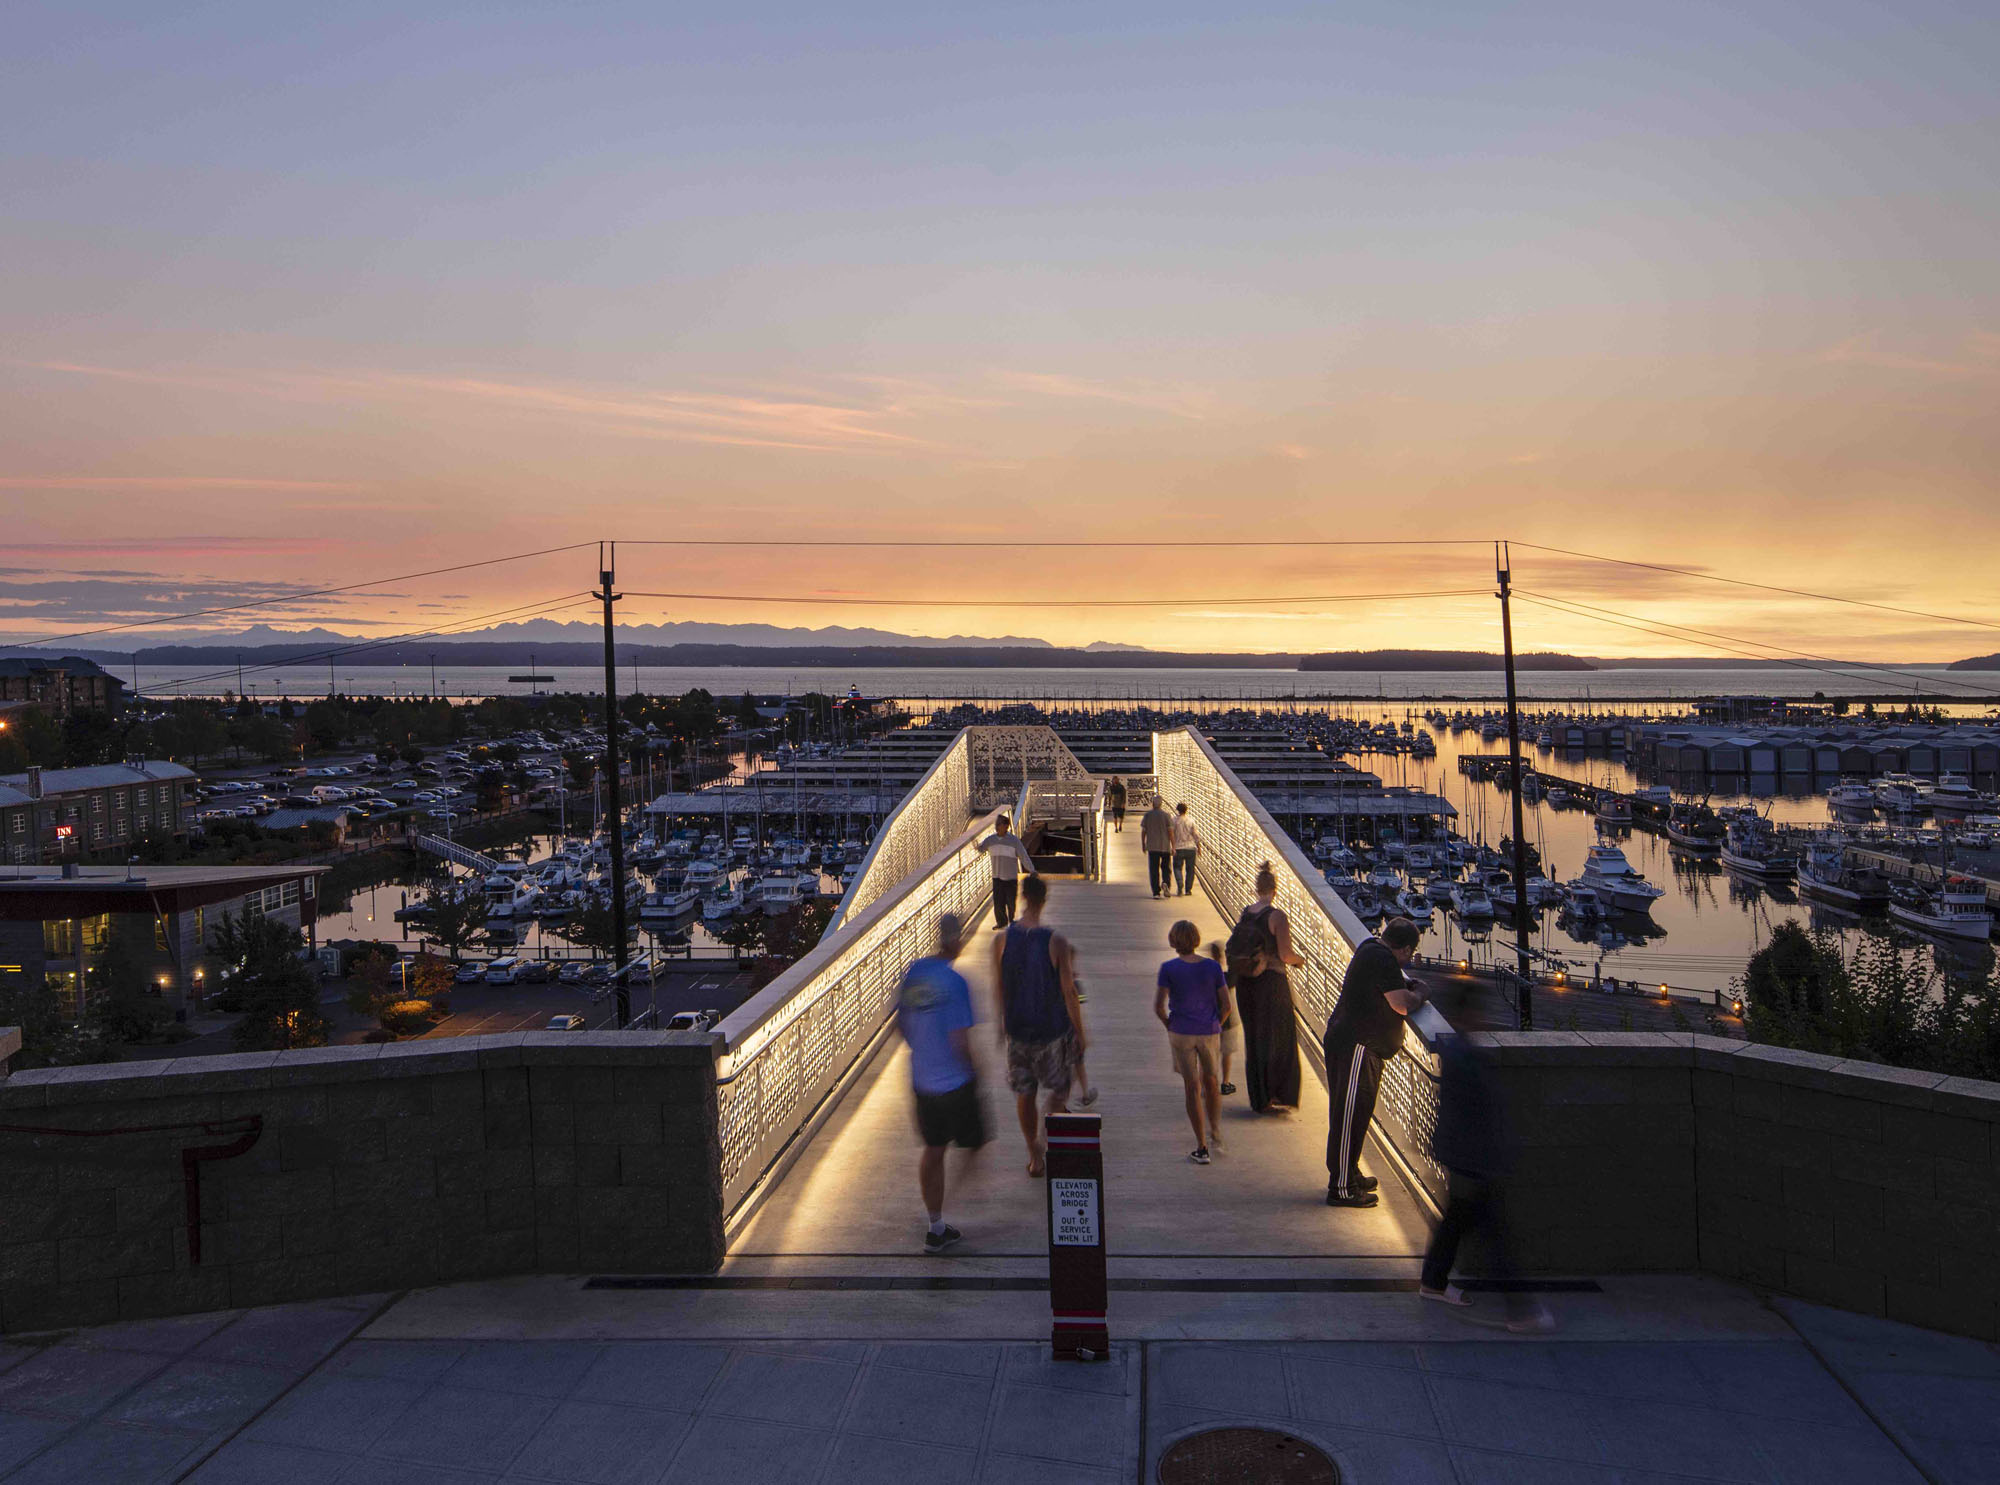 LED strip lights illuminating architectural steel and pathways on a pedestrian bridge overlooking a marina at sunset. Boca Lighting and Controls